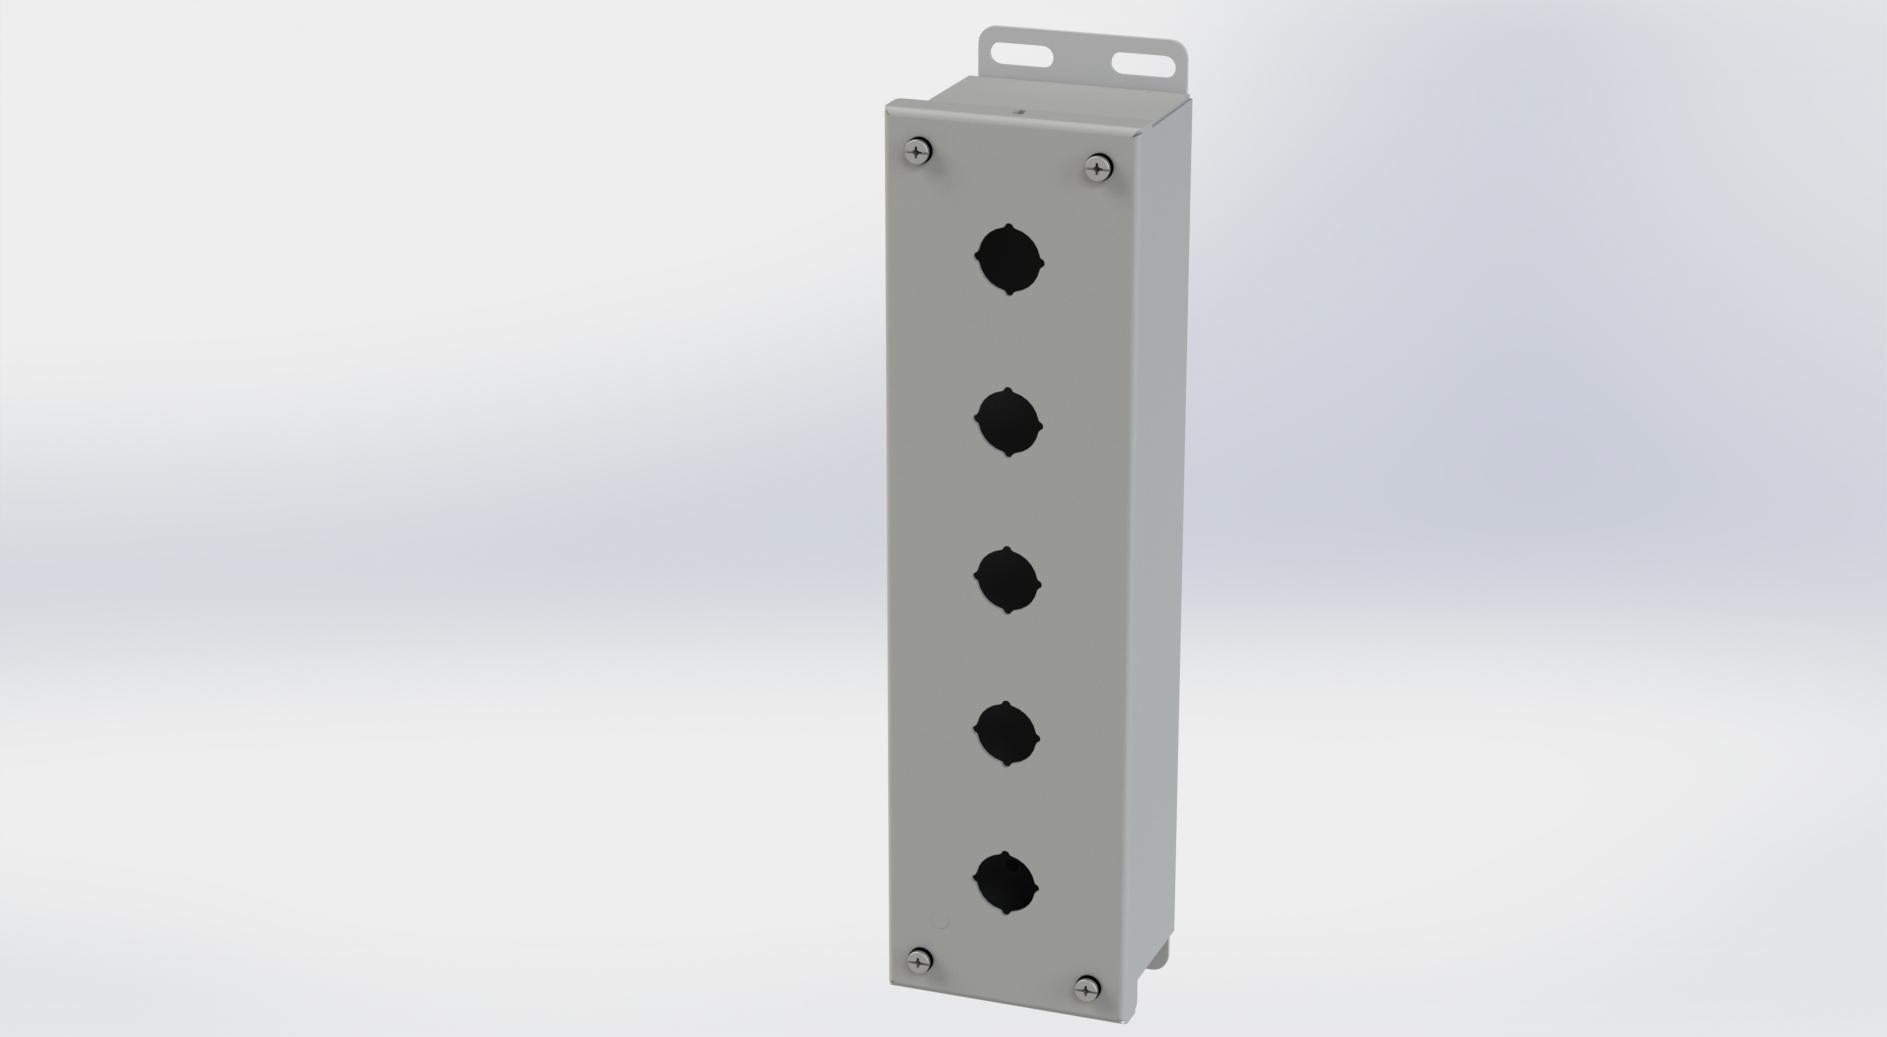 Saginaw Control SCE-5PBI PB Enclosure, Height:12.50", Width:3.25", Depth:2.75", ANSI-61 gray powder coat inside and out. 